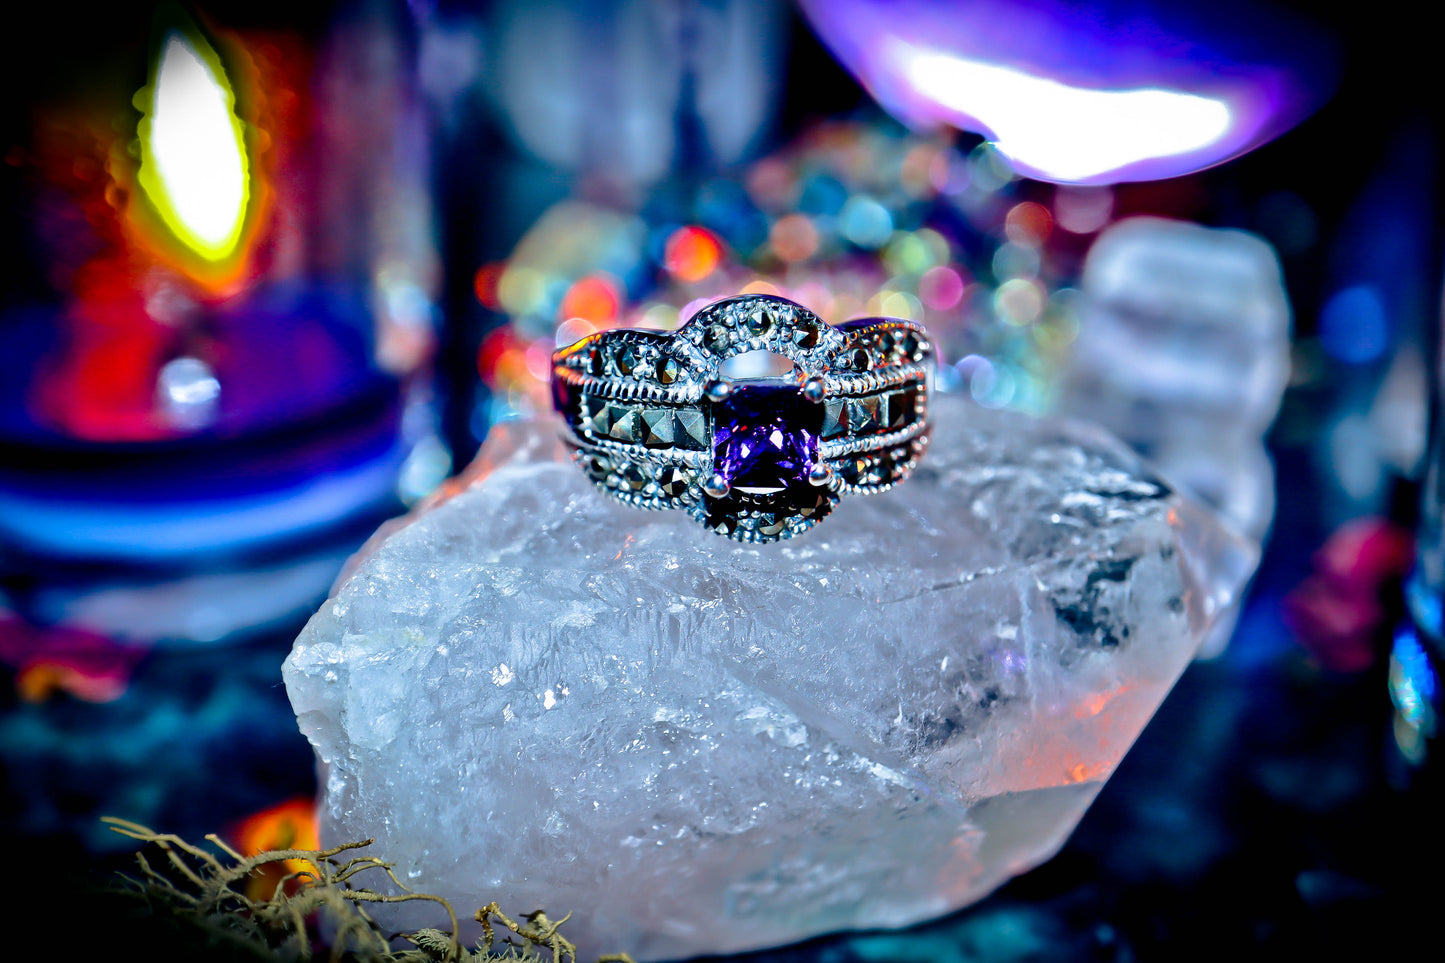 **SACRED** GODDESS HERA Ultimate Beauty & Prosperity Ring of Eloria! GLOWING! True Wisdom, Youth, Success! ~ Witch Magic Spell ~ Gain the Perfect Figure! REAL Beauty! 925 Silver!